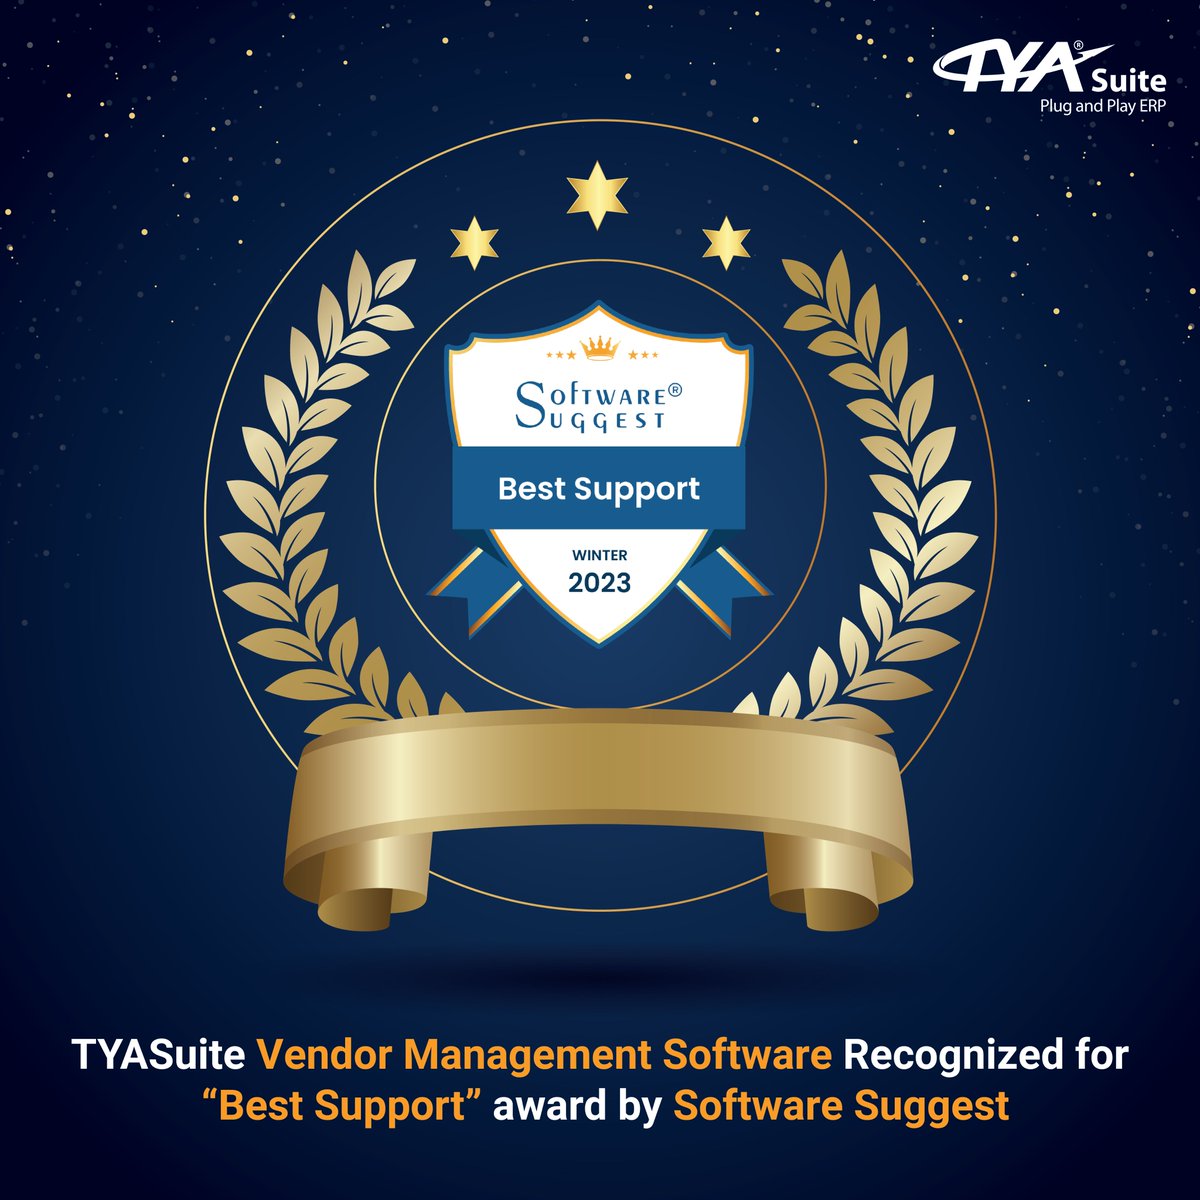 We are thrilled to announce that our Vendor management software has received the “𝐁𝐞𝐬𝐭 𝐒𝐮𝐩𝐩𝐨𝐫𝐭” award by @SoftwareSuggest, a renowned software discovery & recommendation platform.🙌

#vendormanagementsystem #awards #software #tyasuite #vendormanagement #vendor